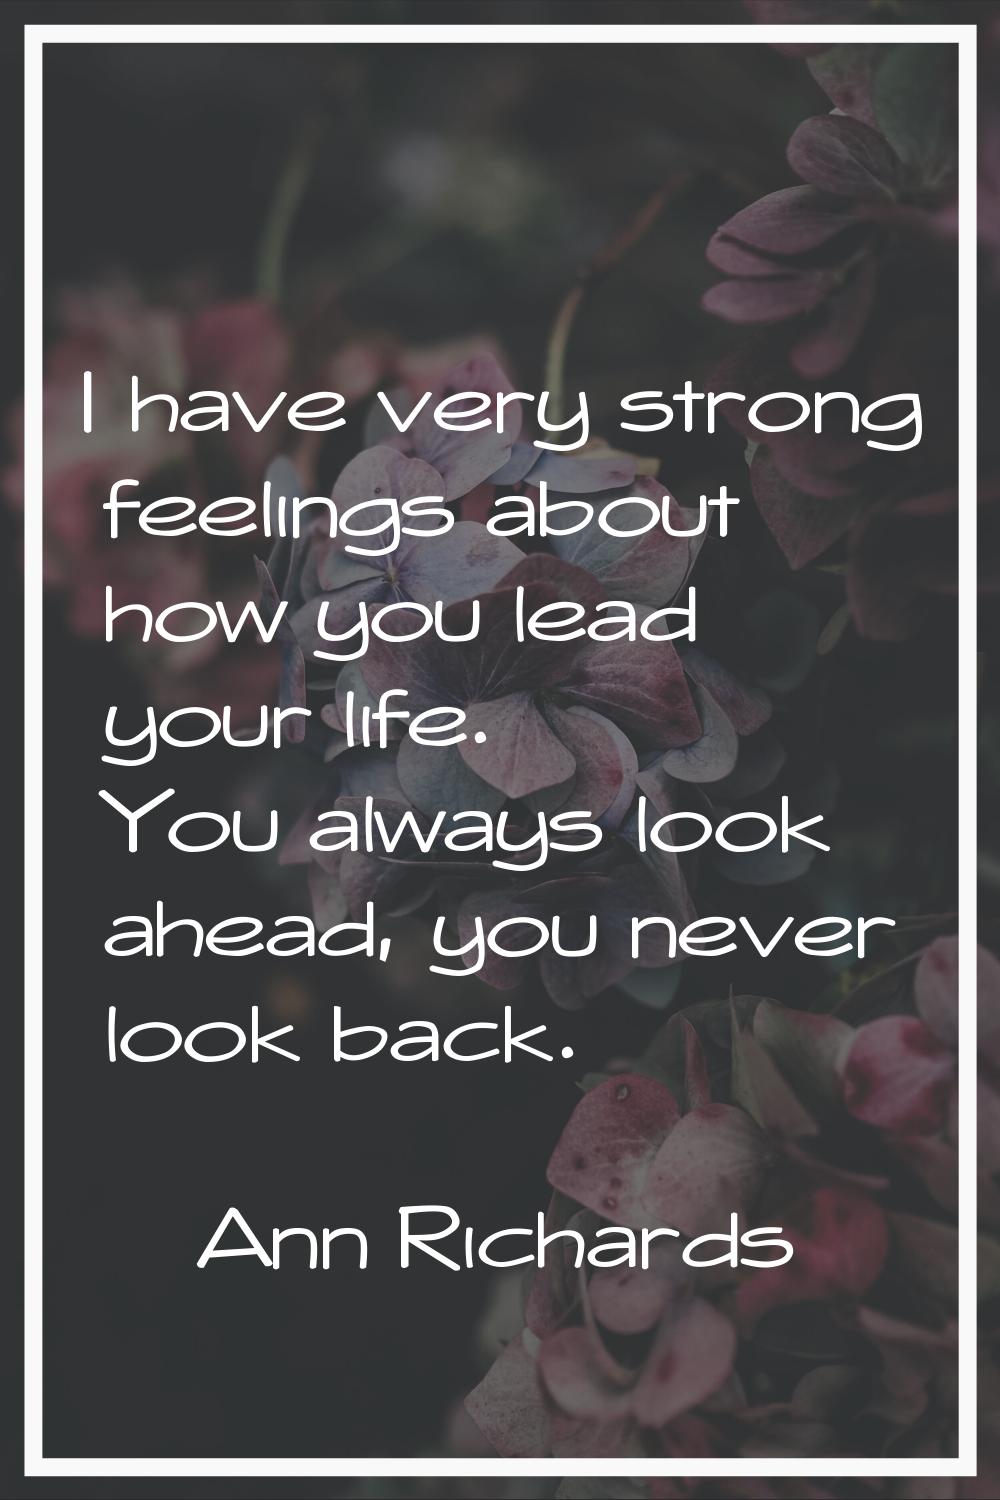 I have very strong feelings about how you lead your life. You always look ahead, you never look bac